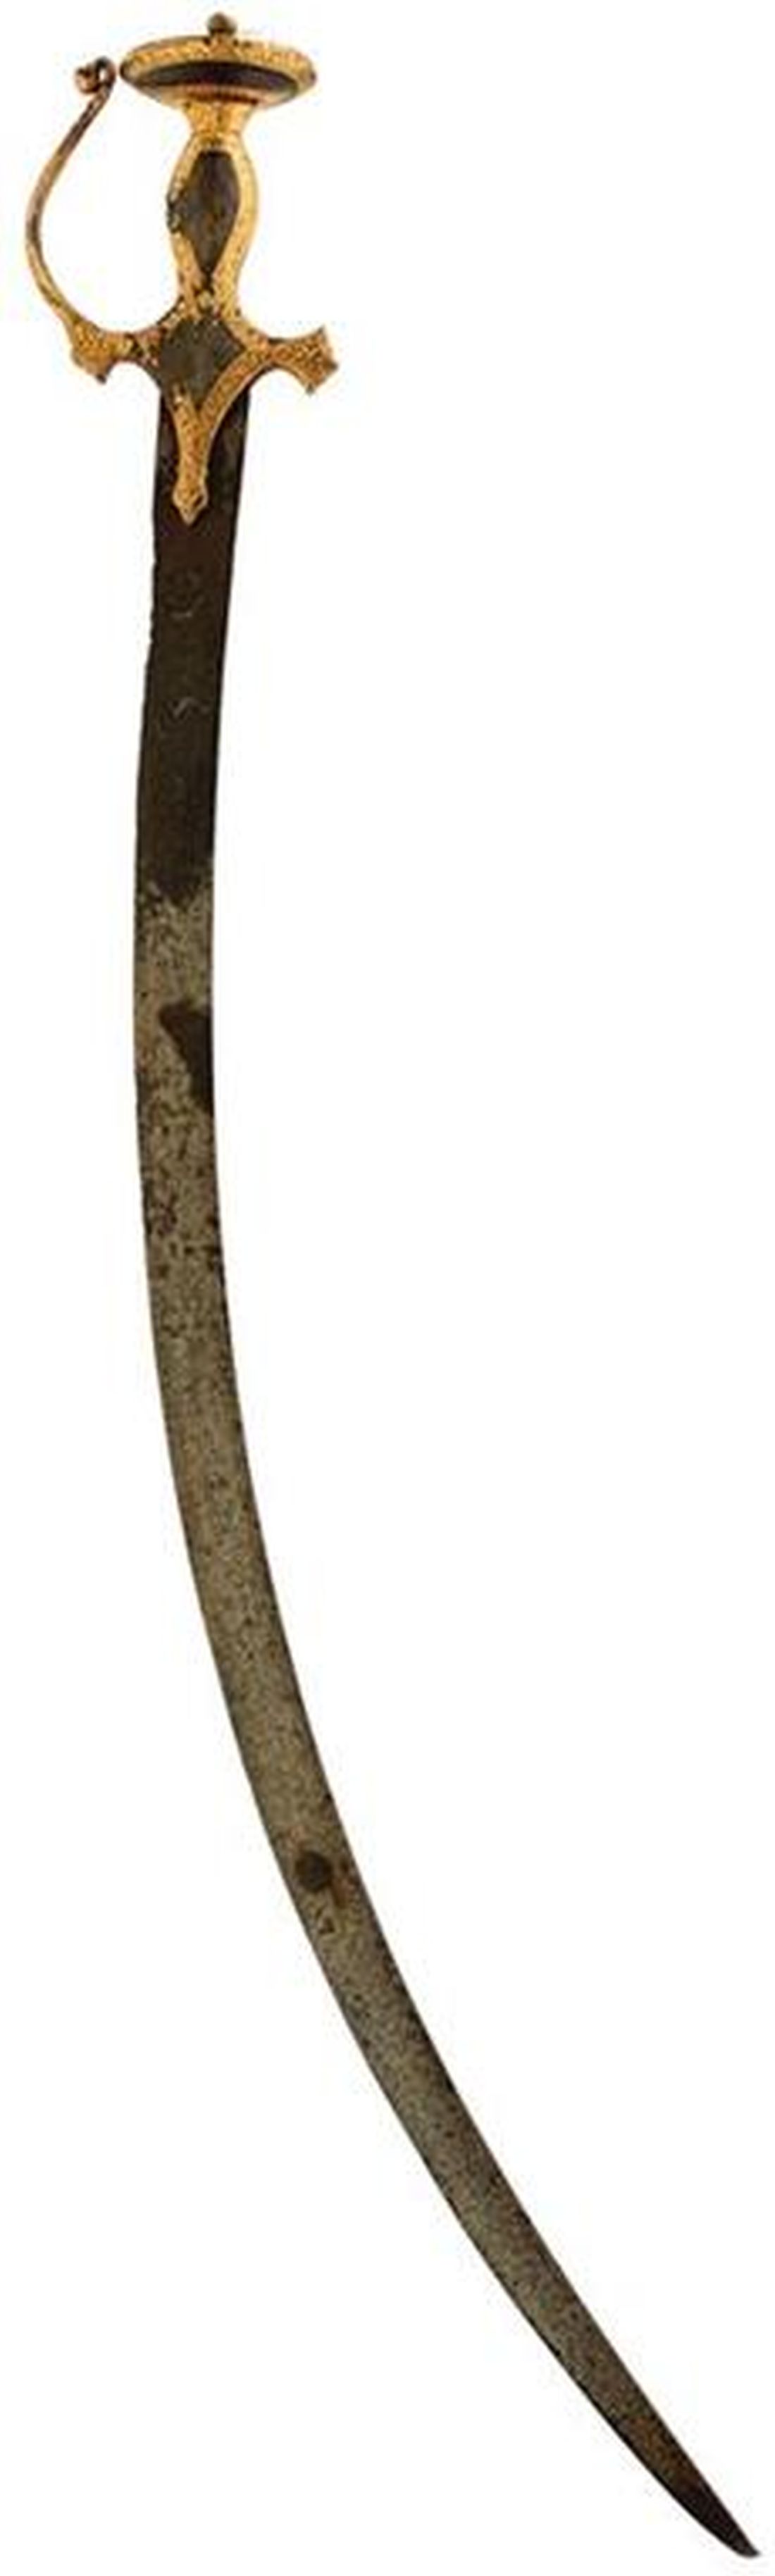 A 19TH CENTURY INDIAN TULWAR OR SWORD, 76.5cm sharply curved damascus blade, the characteristic gold